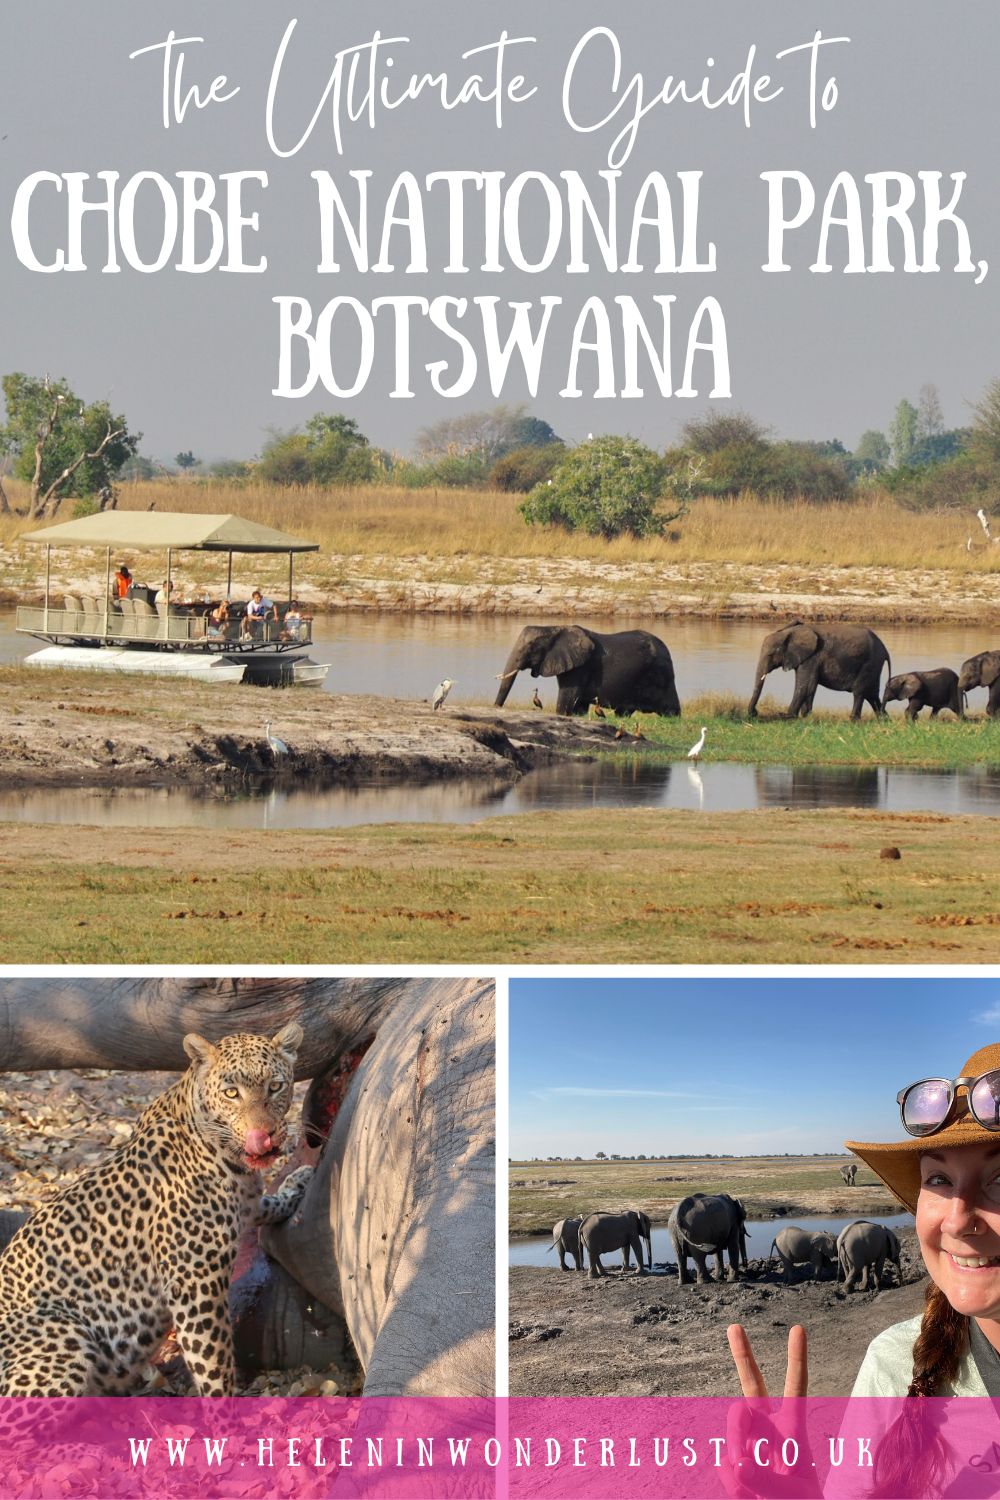 The Ultimate Guide to Chobe National Park, Botswana